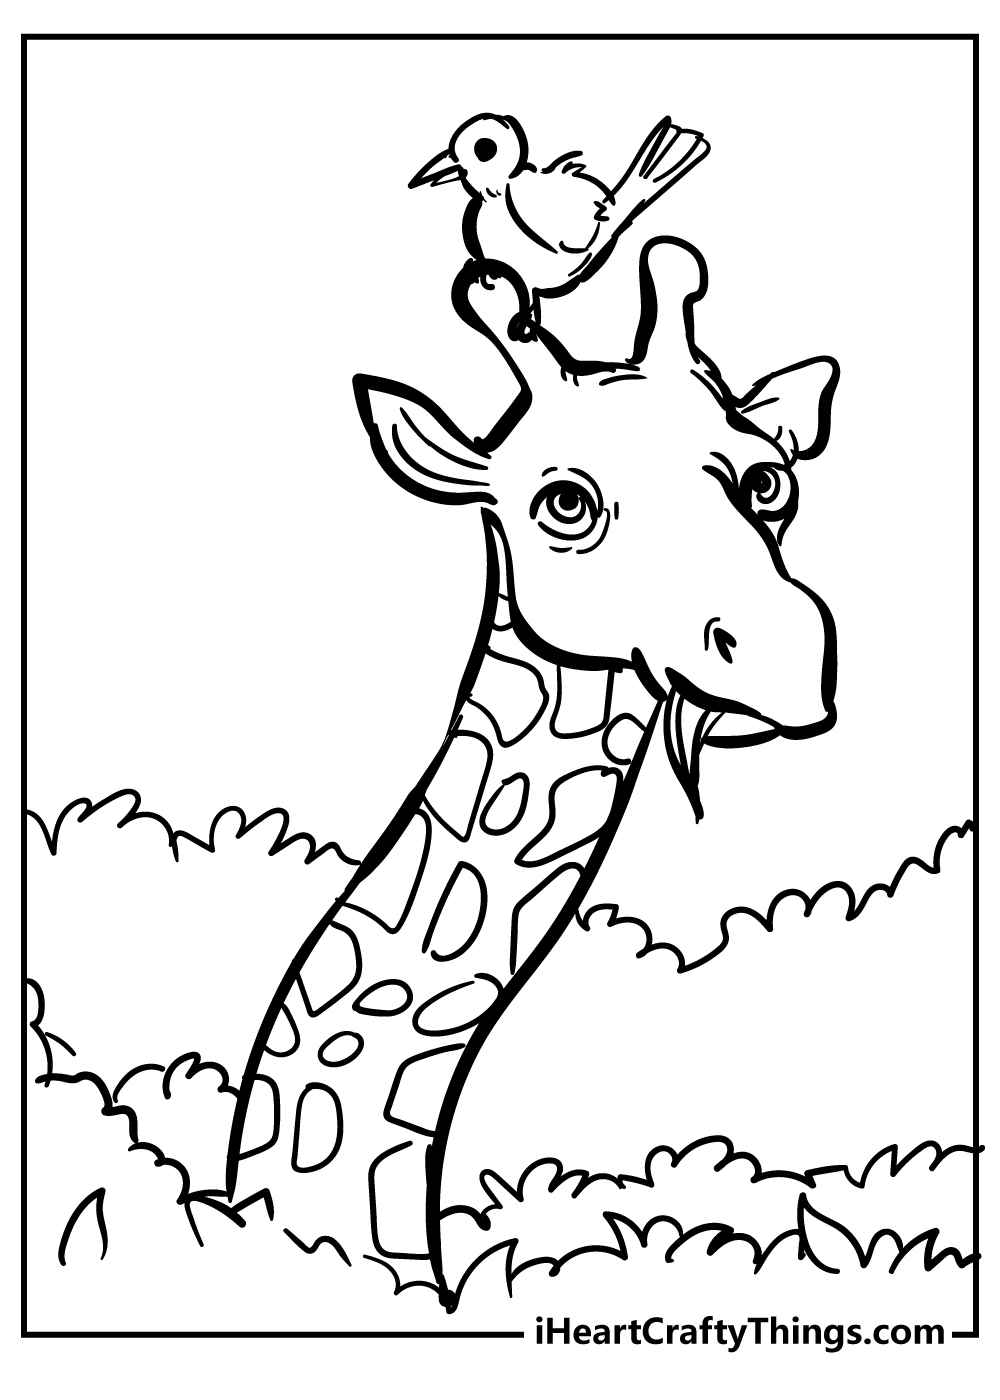 Giraffe coloring pages free printable